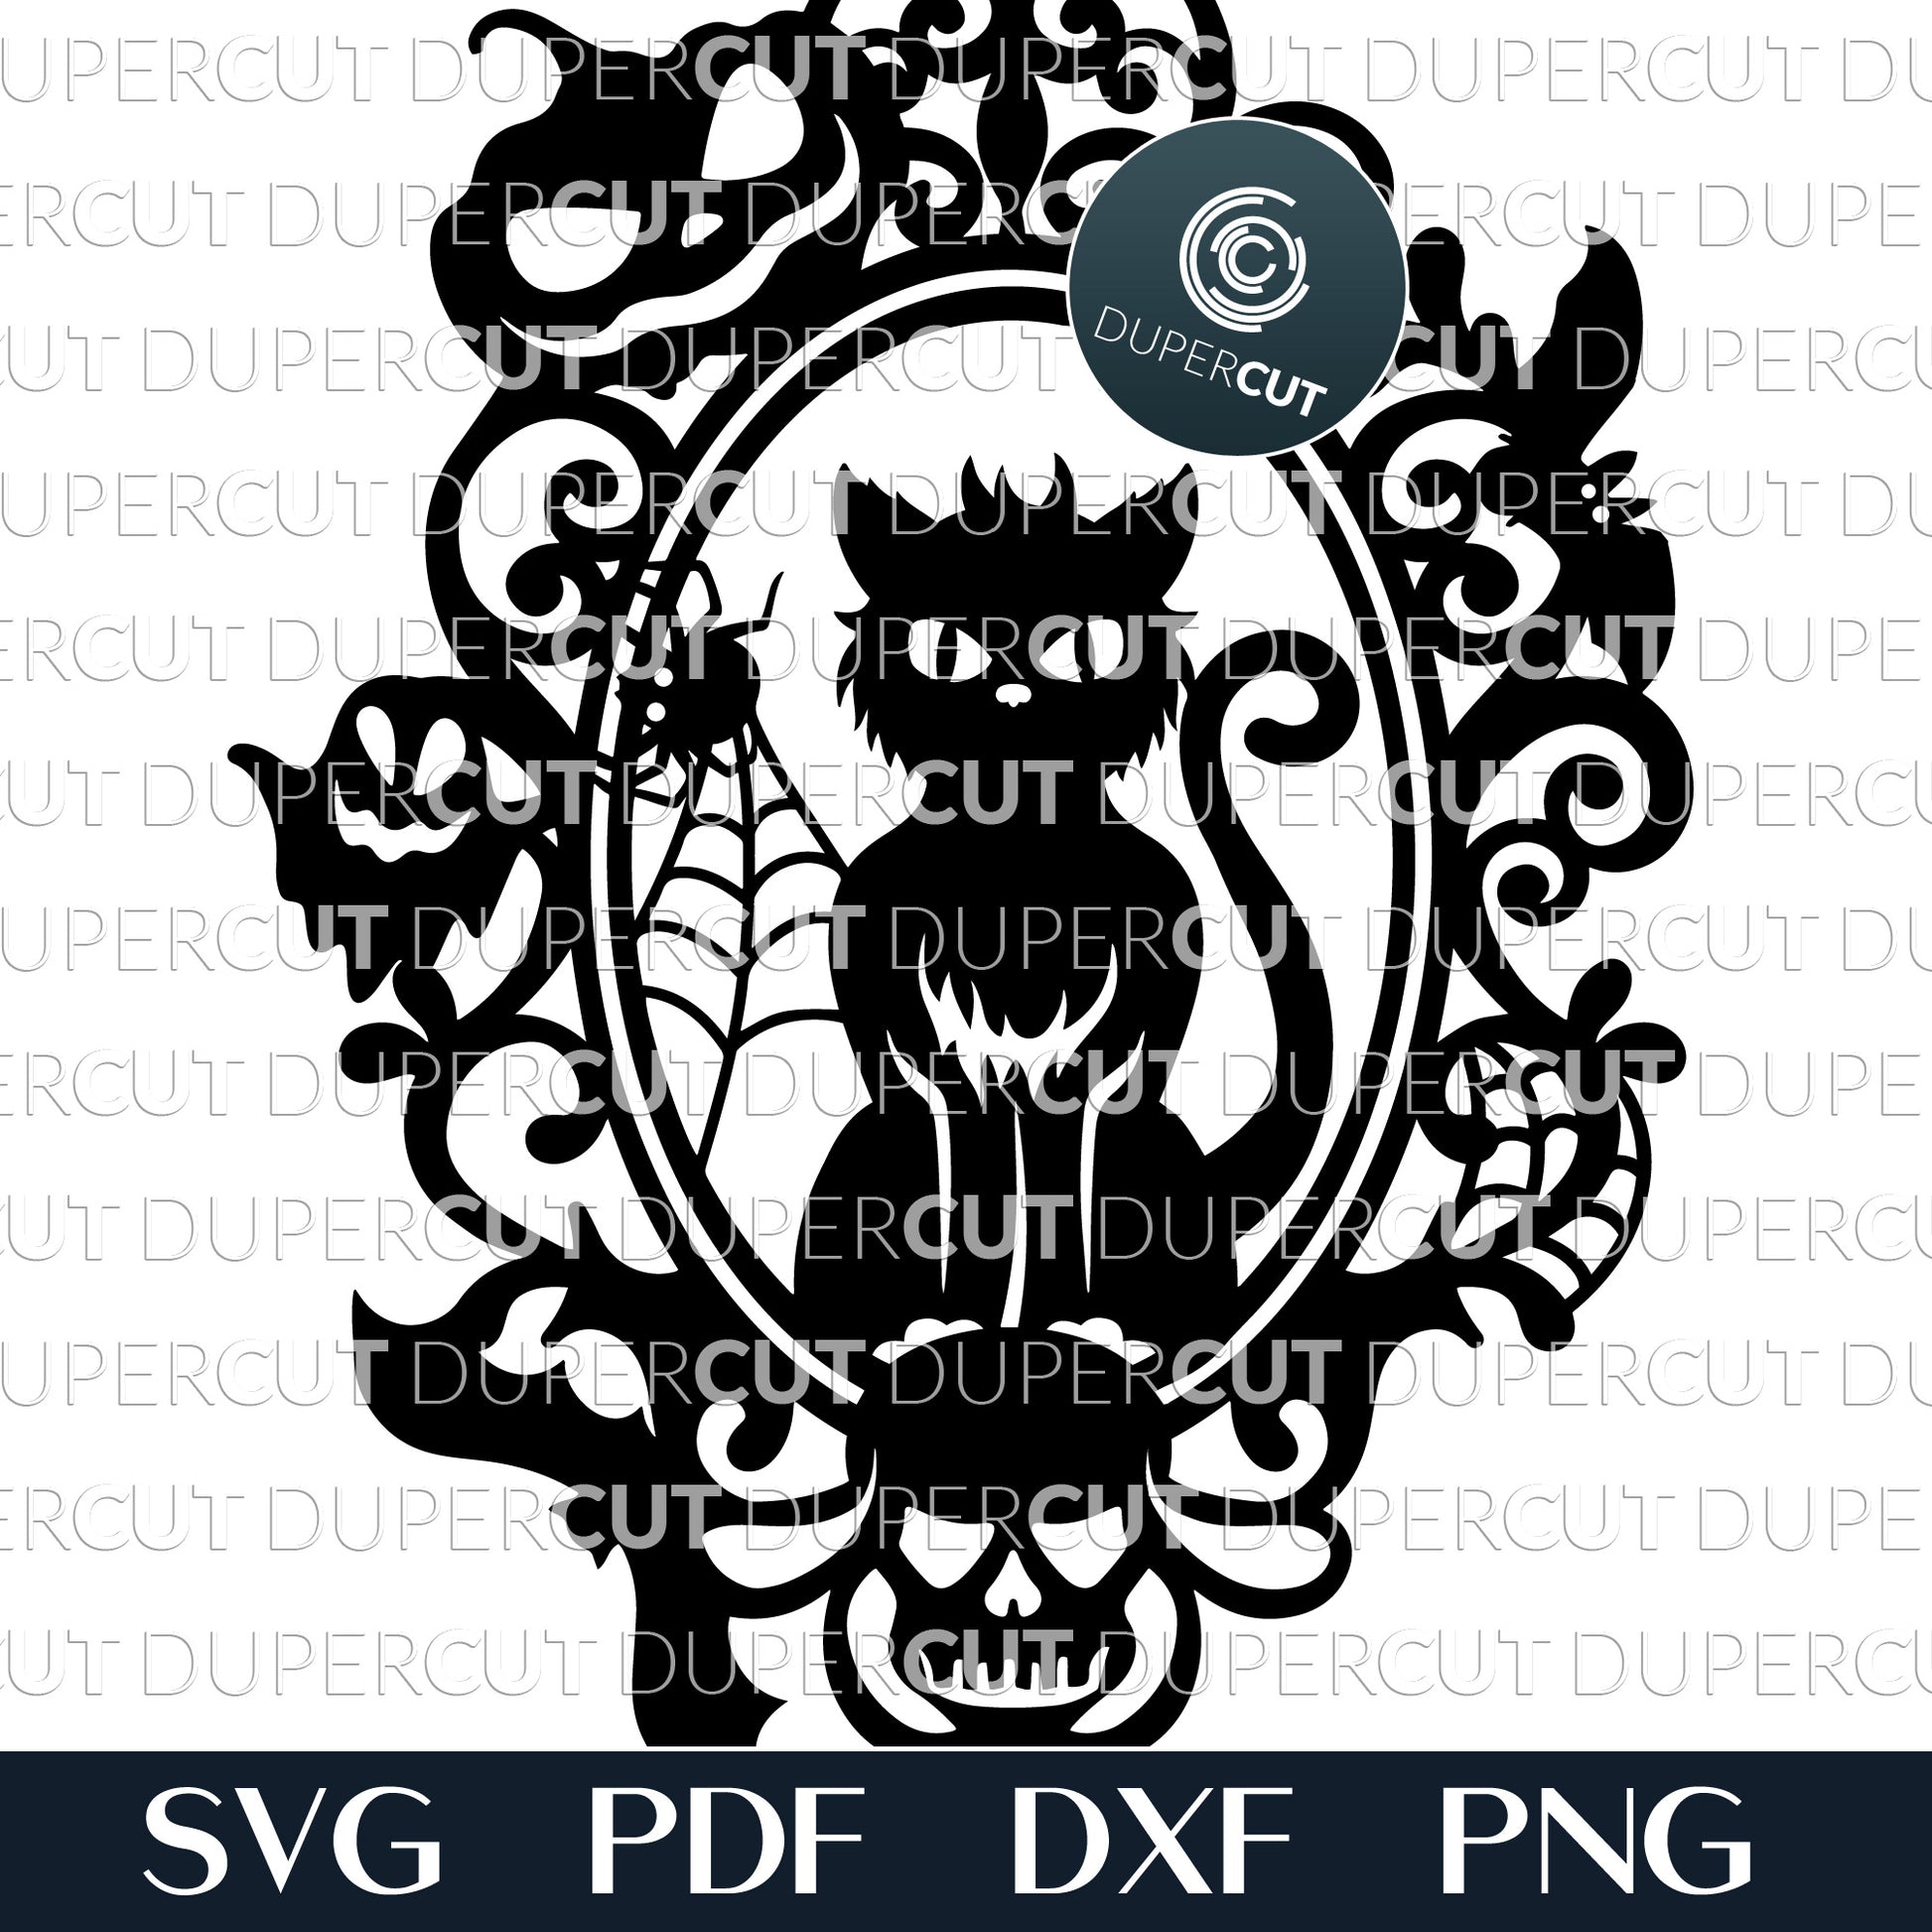 Black Cat with spider web Halloween papercutting template - SVG PNG DXF layered cutting files for laser machines Glowforge, Cricut, Silhouette, CNC plasma machines by DuperCut